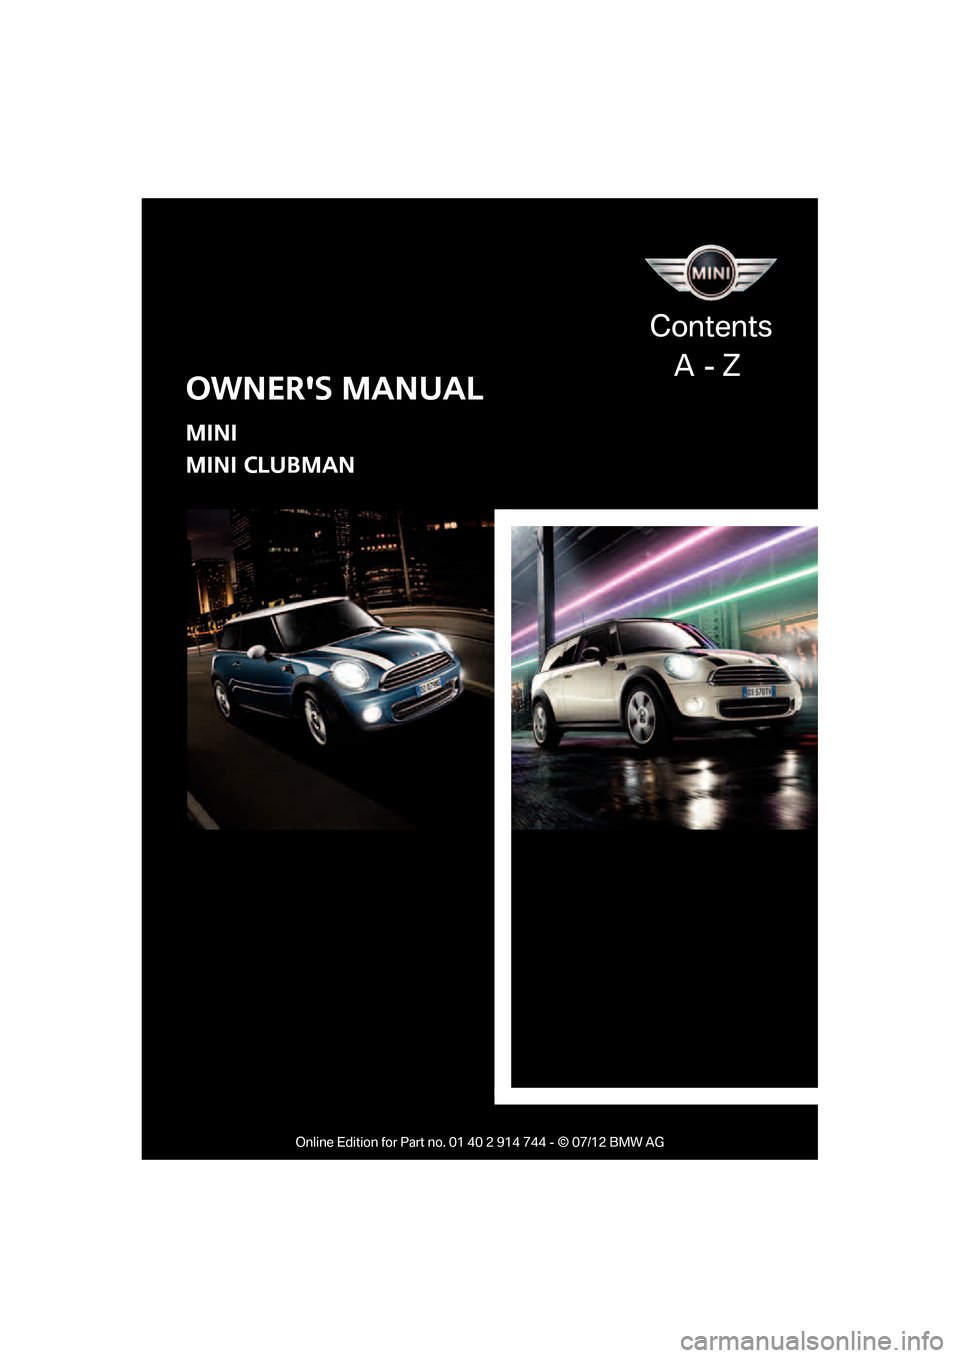 MINI Clubman 2012  Owners Manual OWNERS MANUAL
MINI
MINI CLUBMAN
Contents
    A  - Z

Online Edition for Part no. 01 40 2 914 744 - © 07/12 BMW AG  